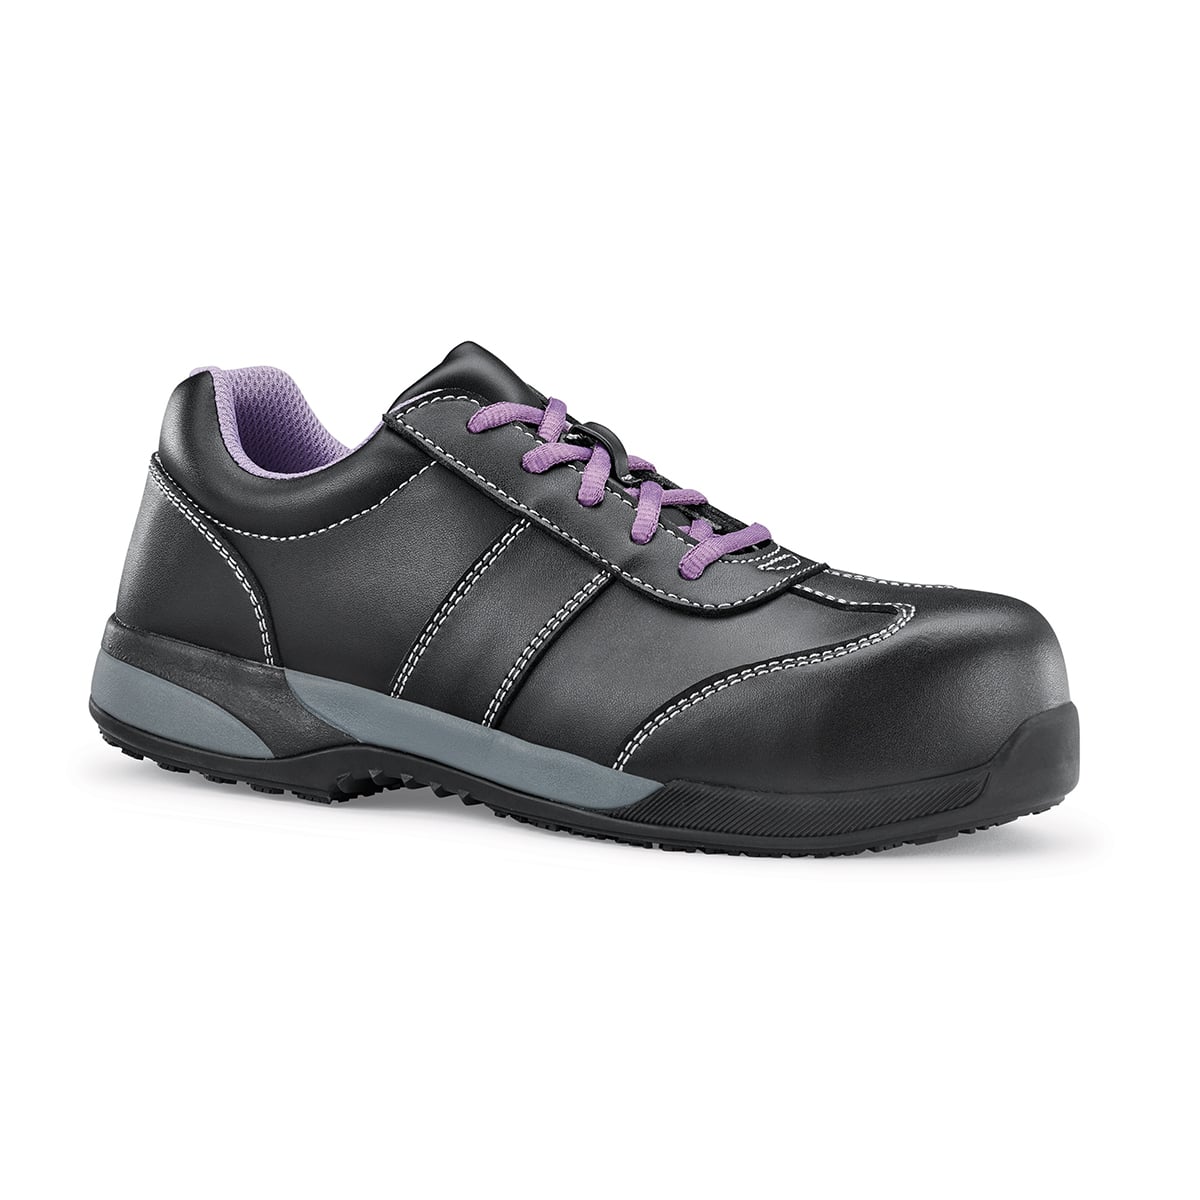 Safety shoes, the Bonnie has an anti-clog, slip-resistant outsole and composite toe cap (200 joule), seen in profile from the right side.